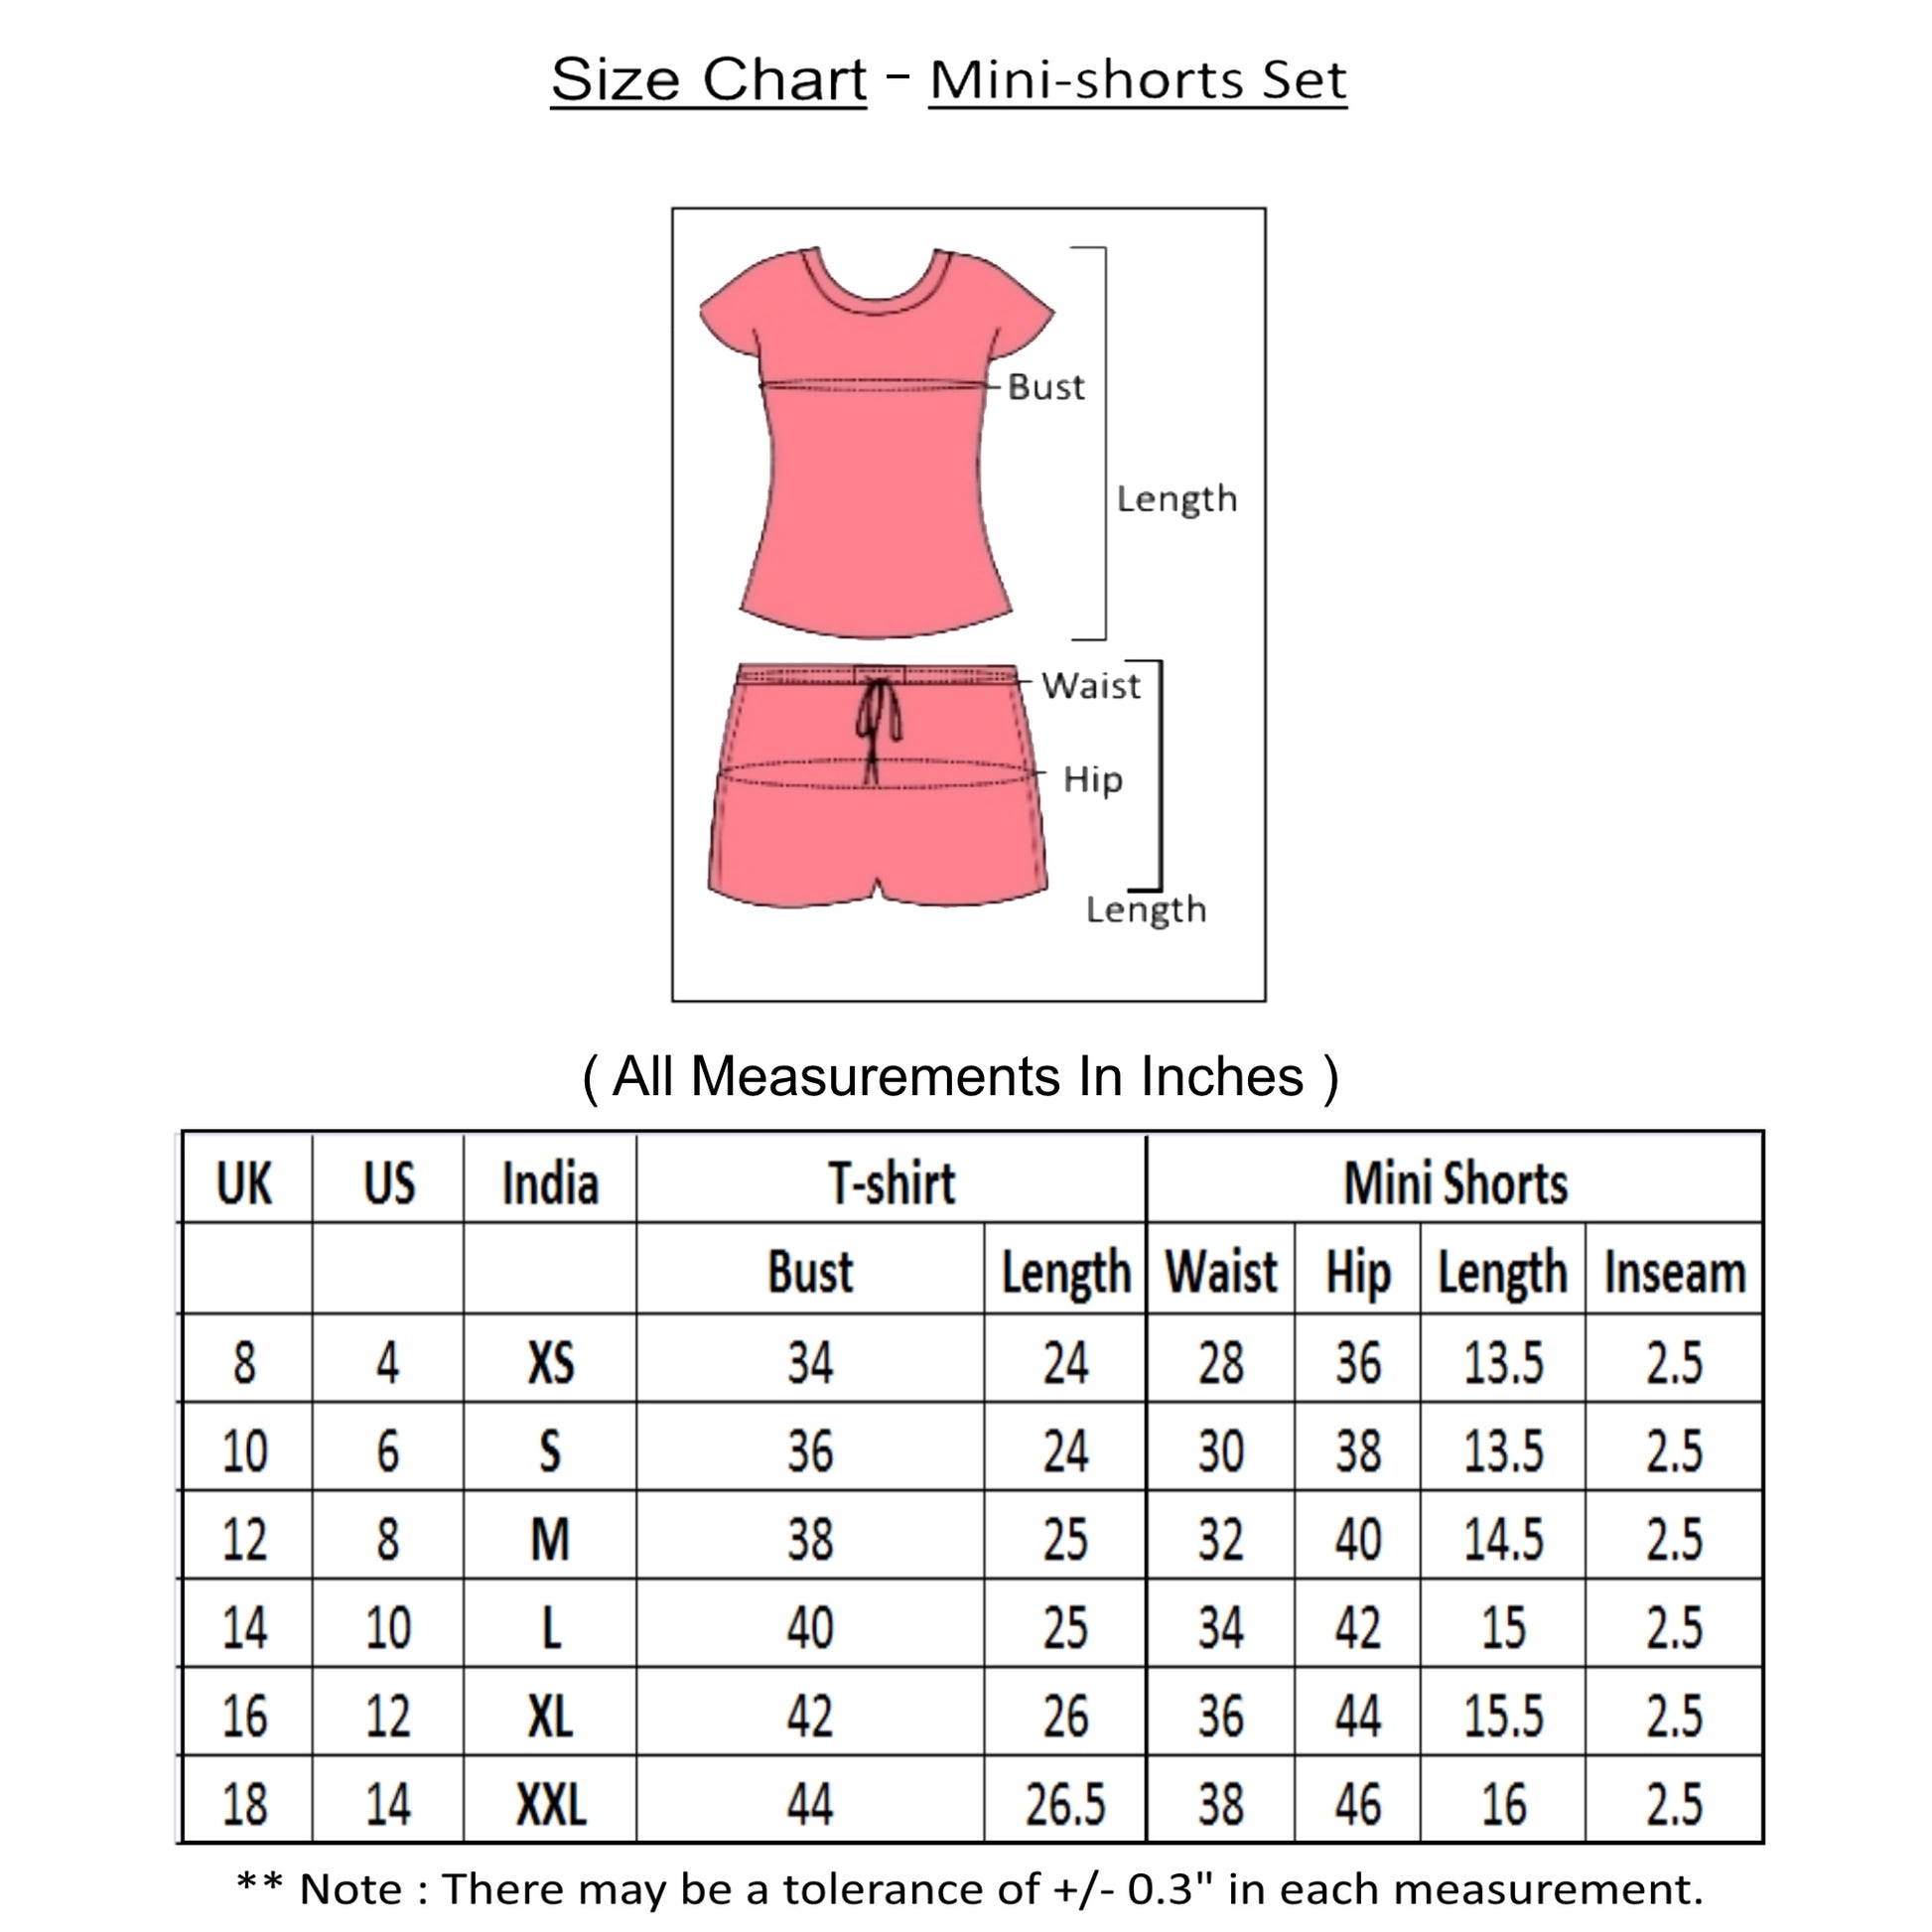 size chart of night shorts set for women with measurements for all sizes.